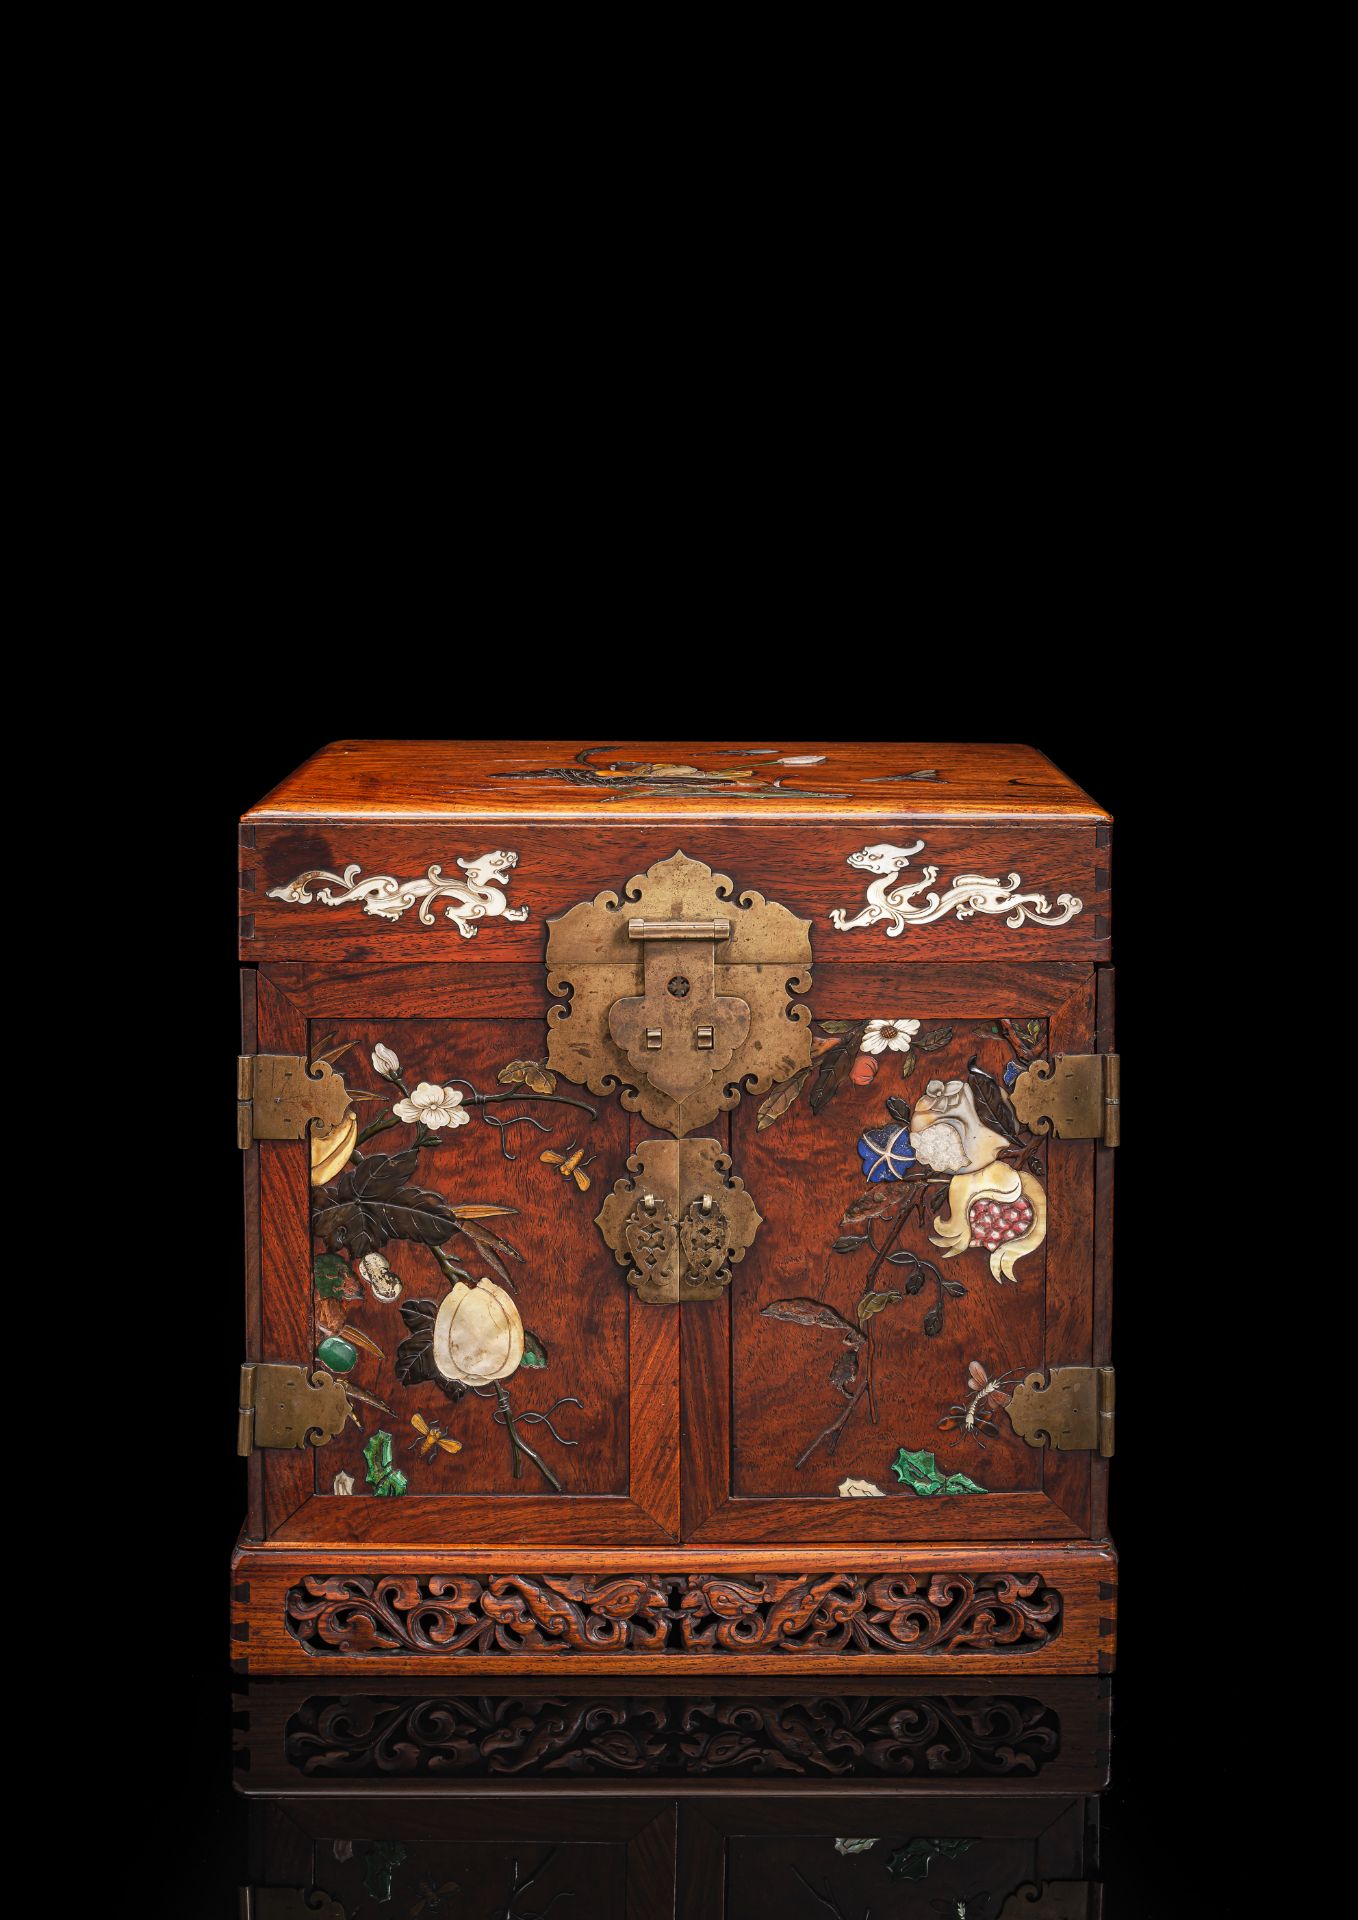 A FINE AND RARE INLAID-HUANGHUALI CABINET